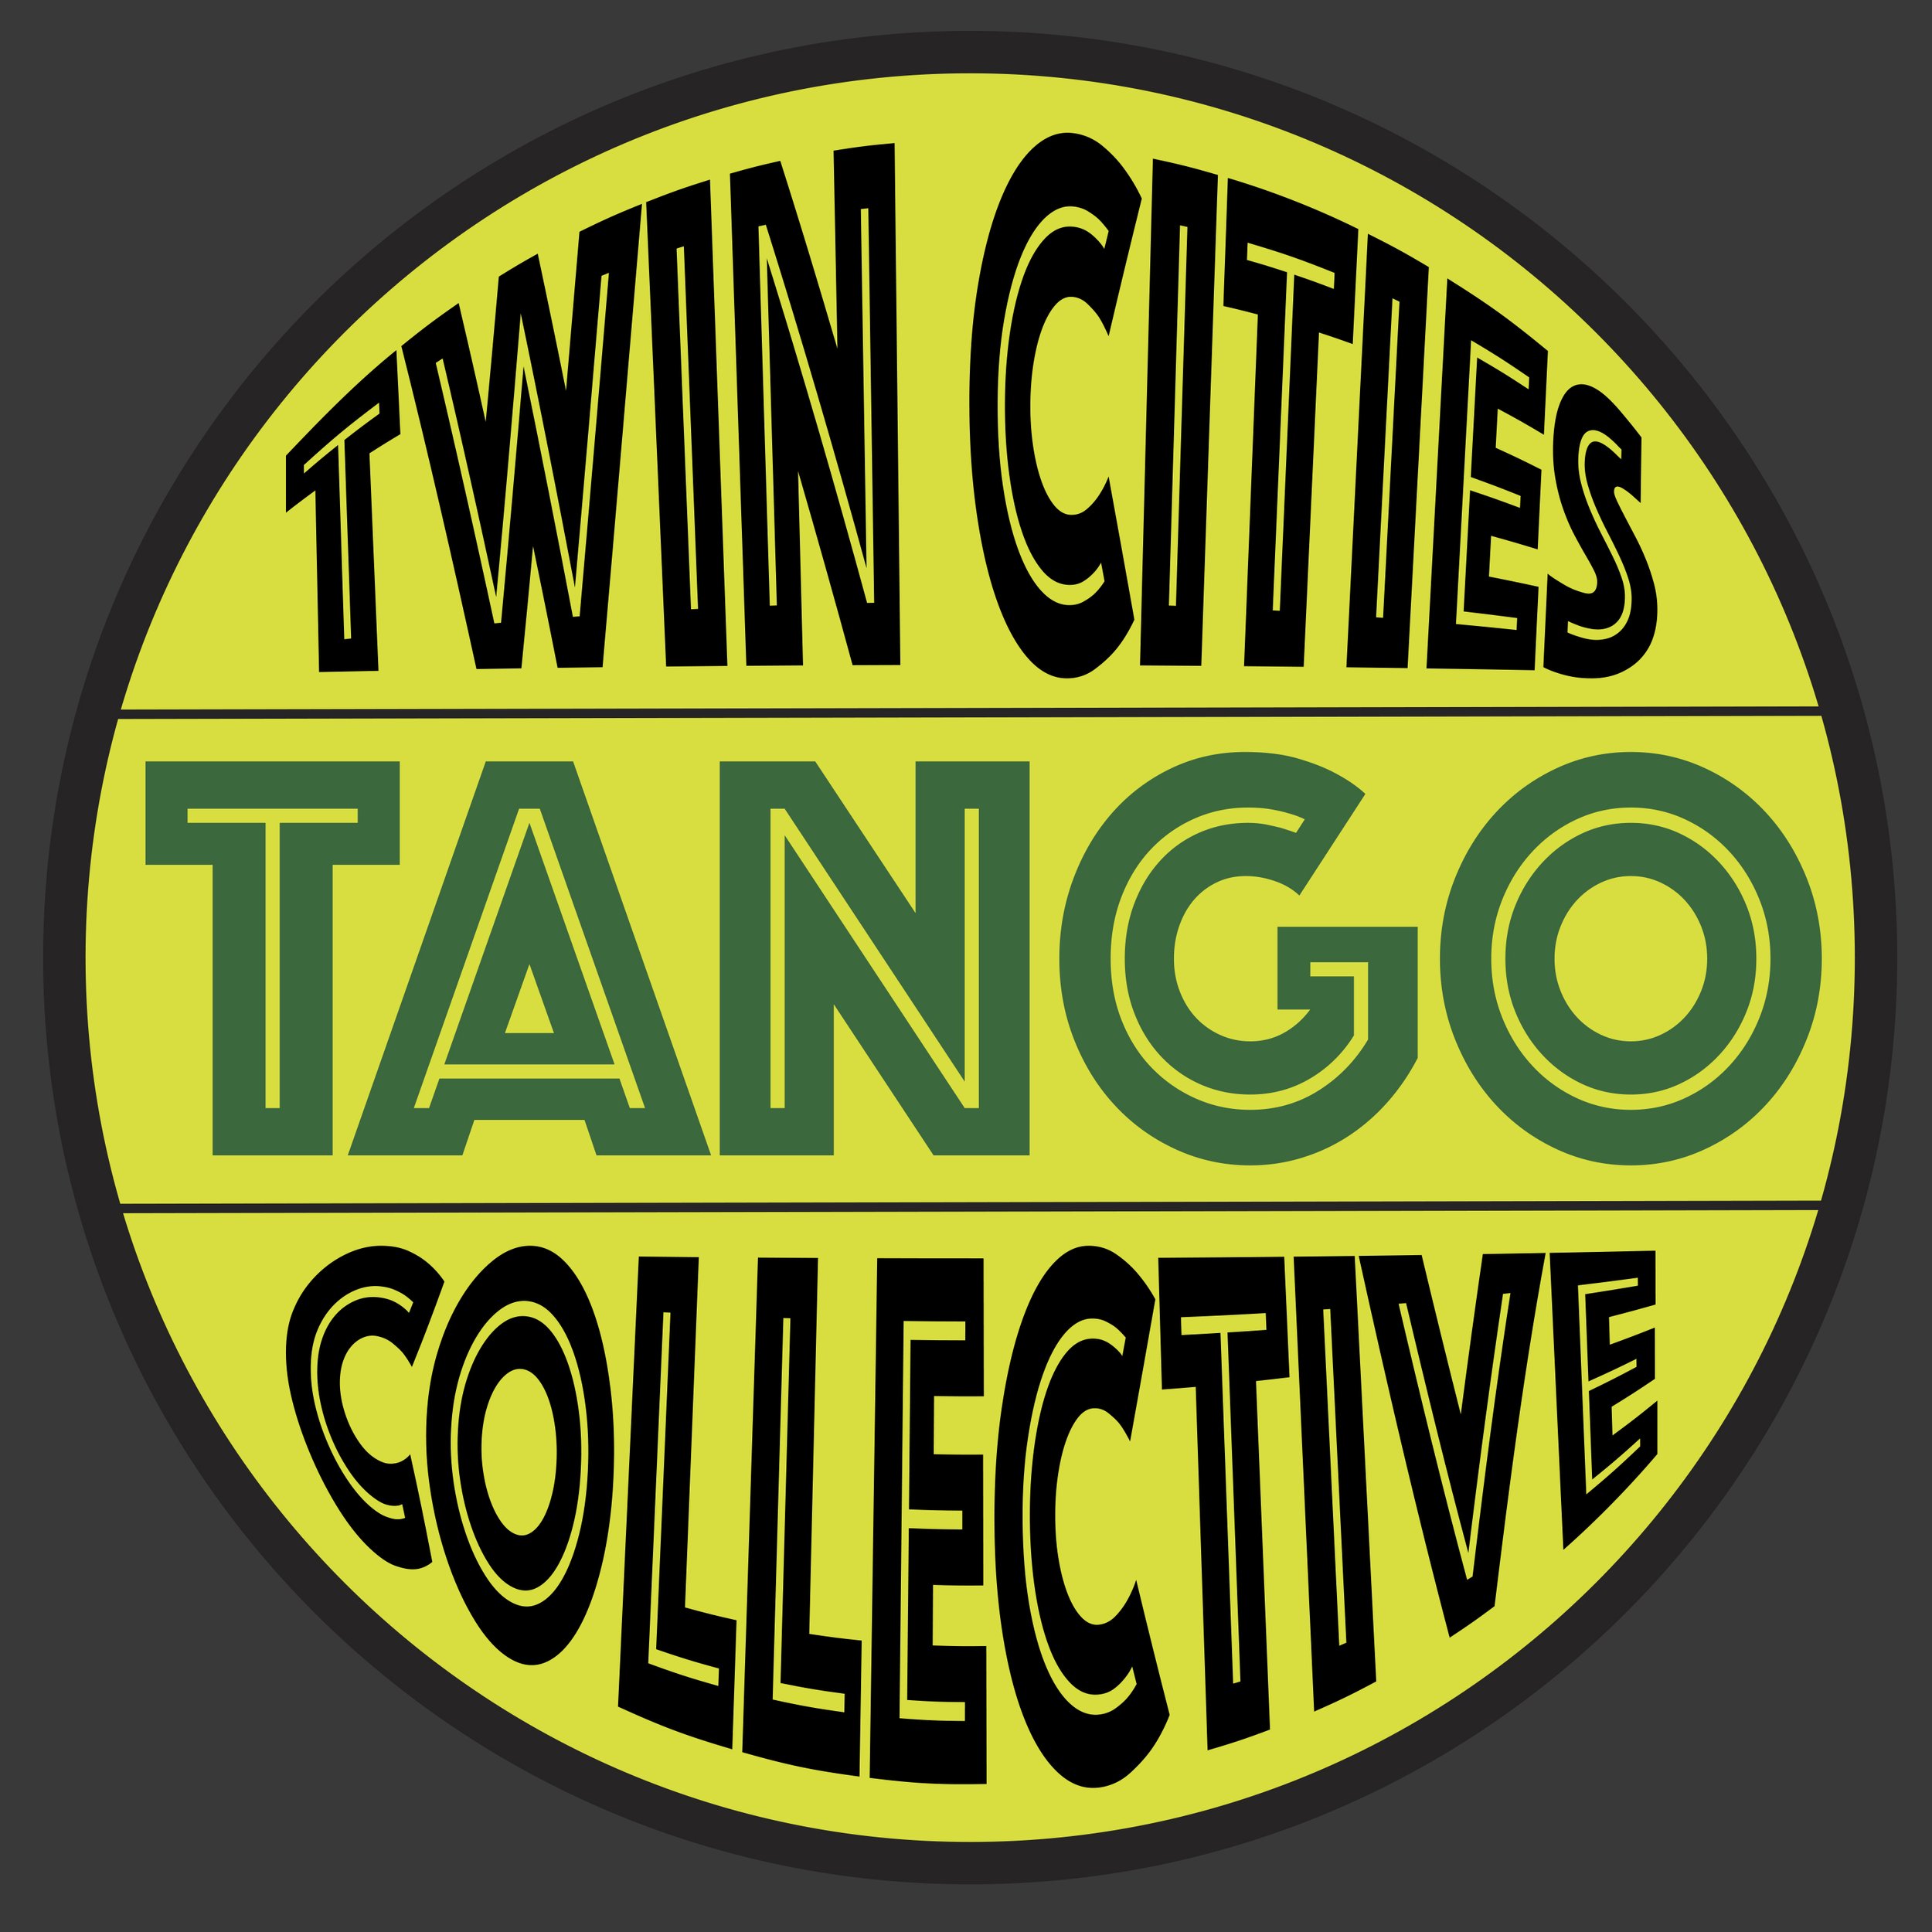 TWIN CITIES TANGO COLLECTIVE